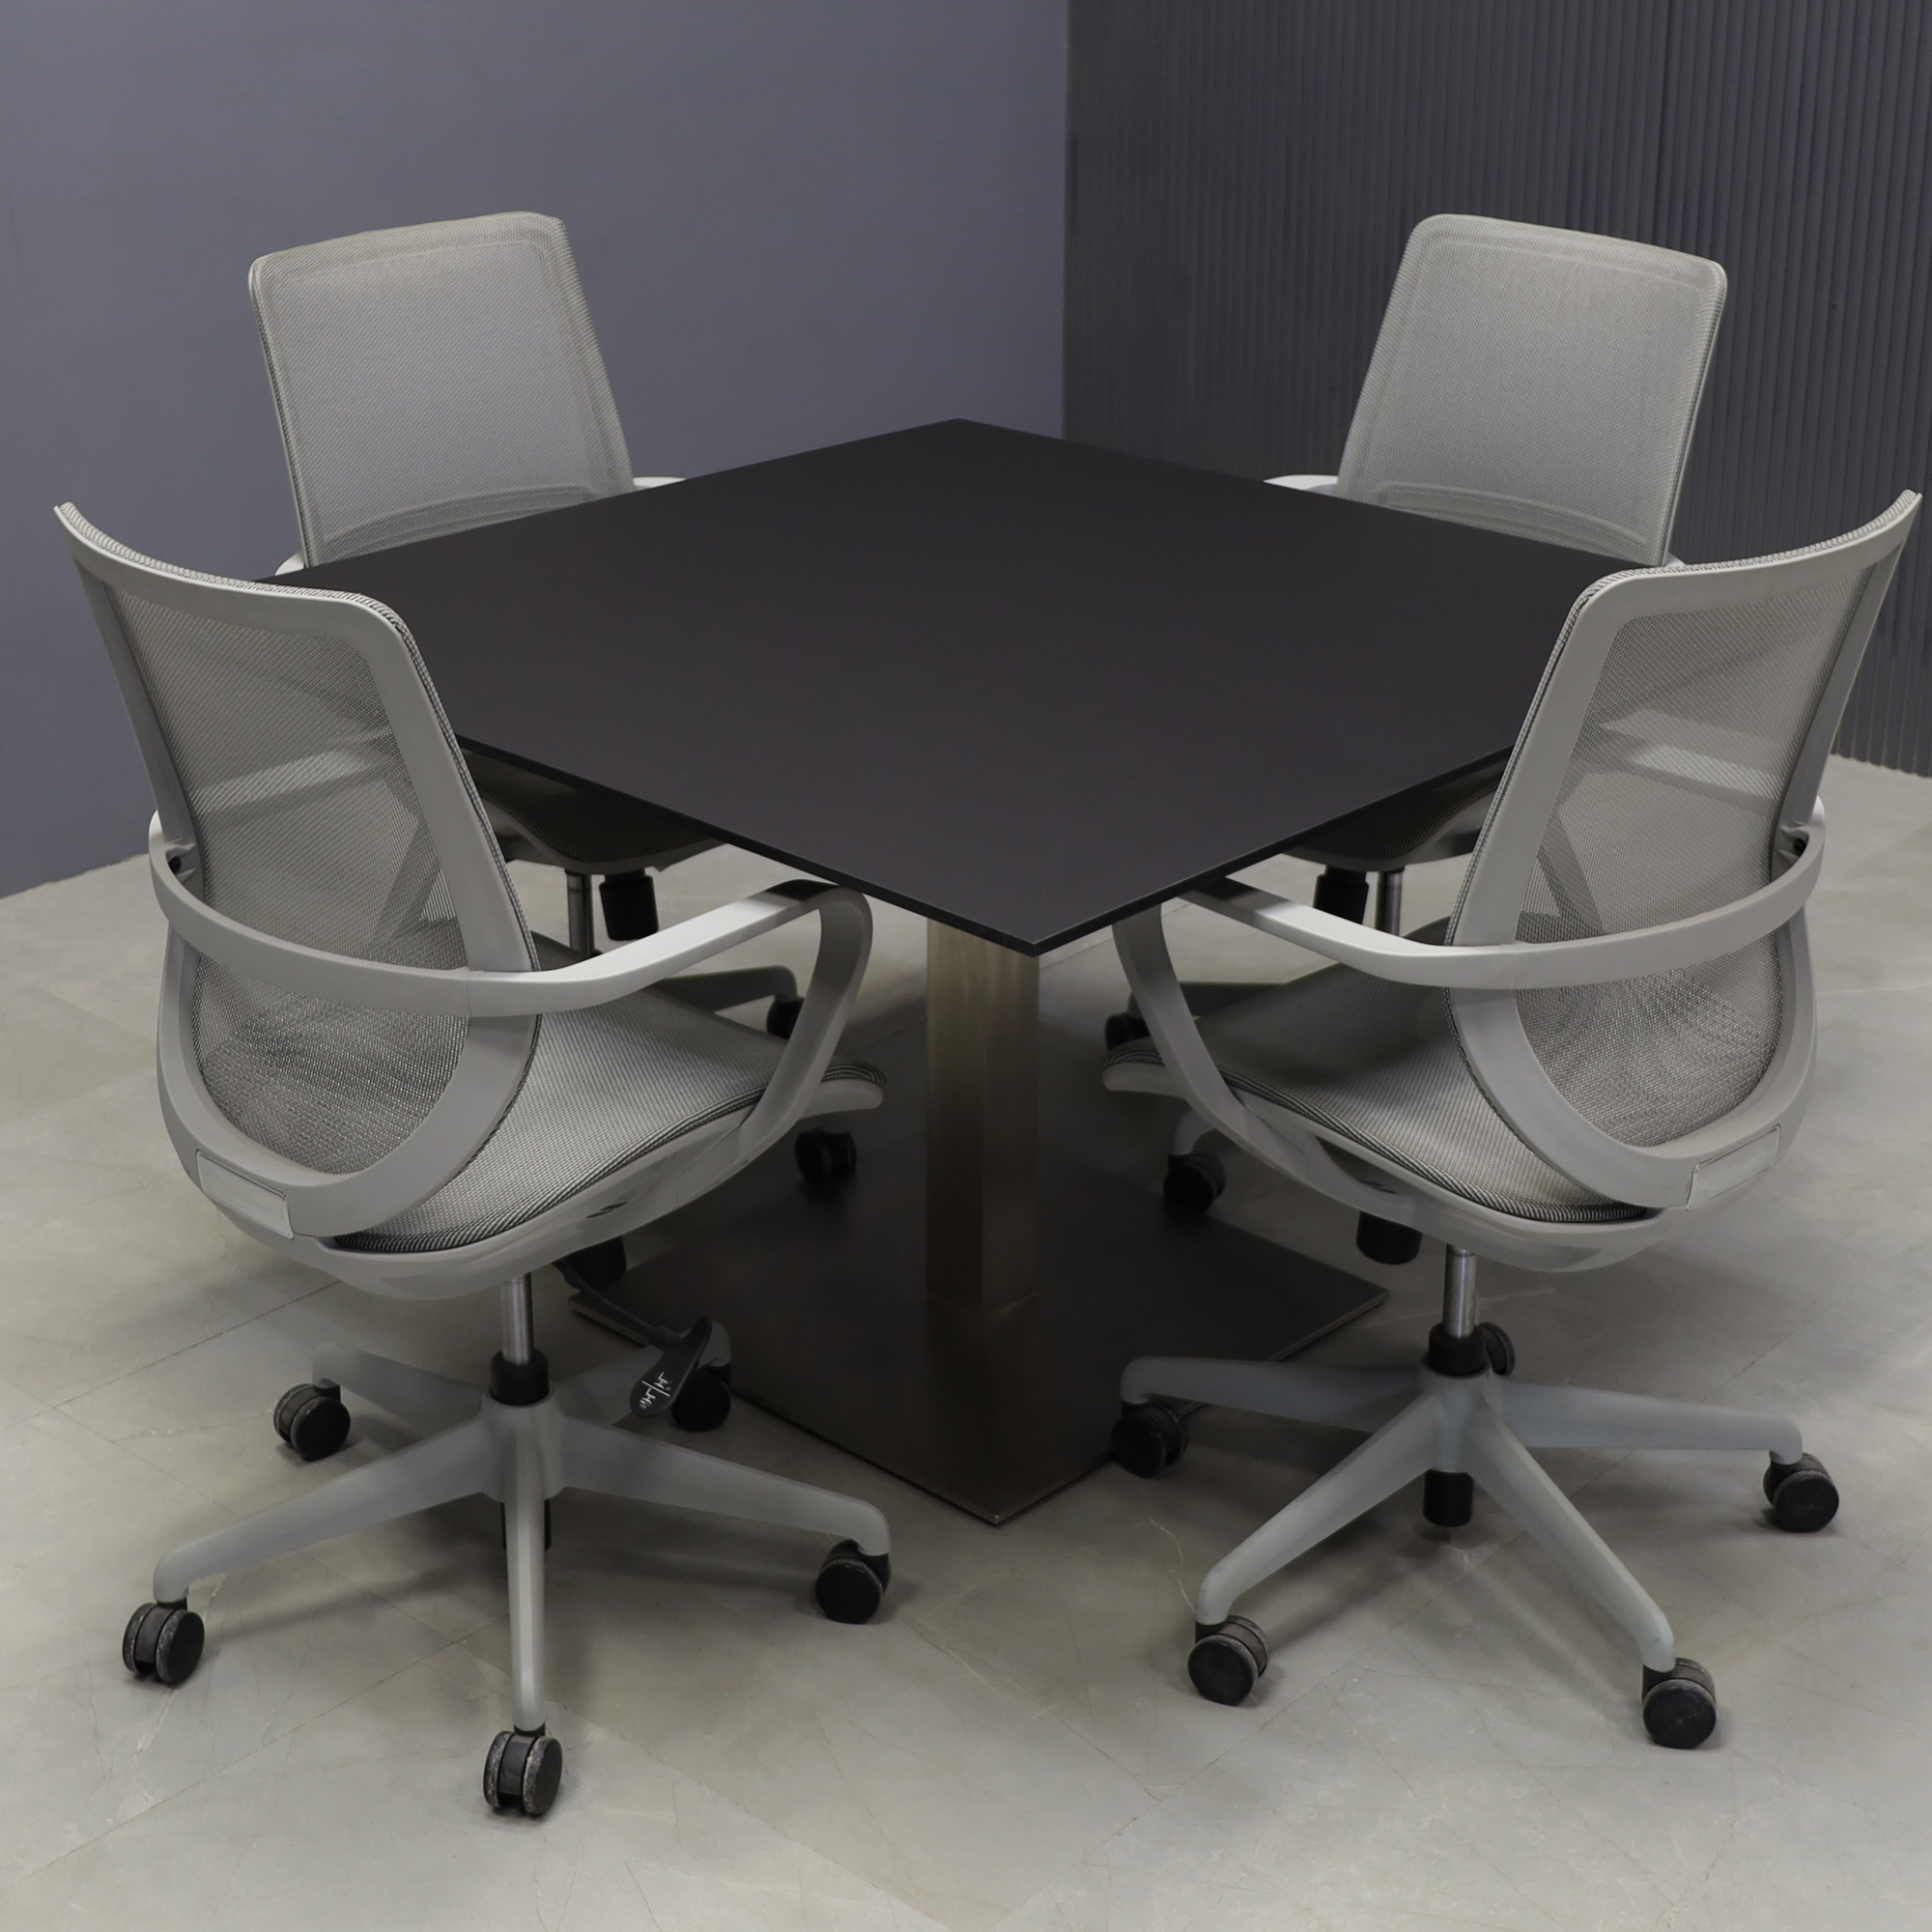 46-inch California Square Conference Table with 1/2